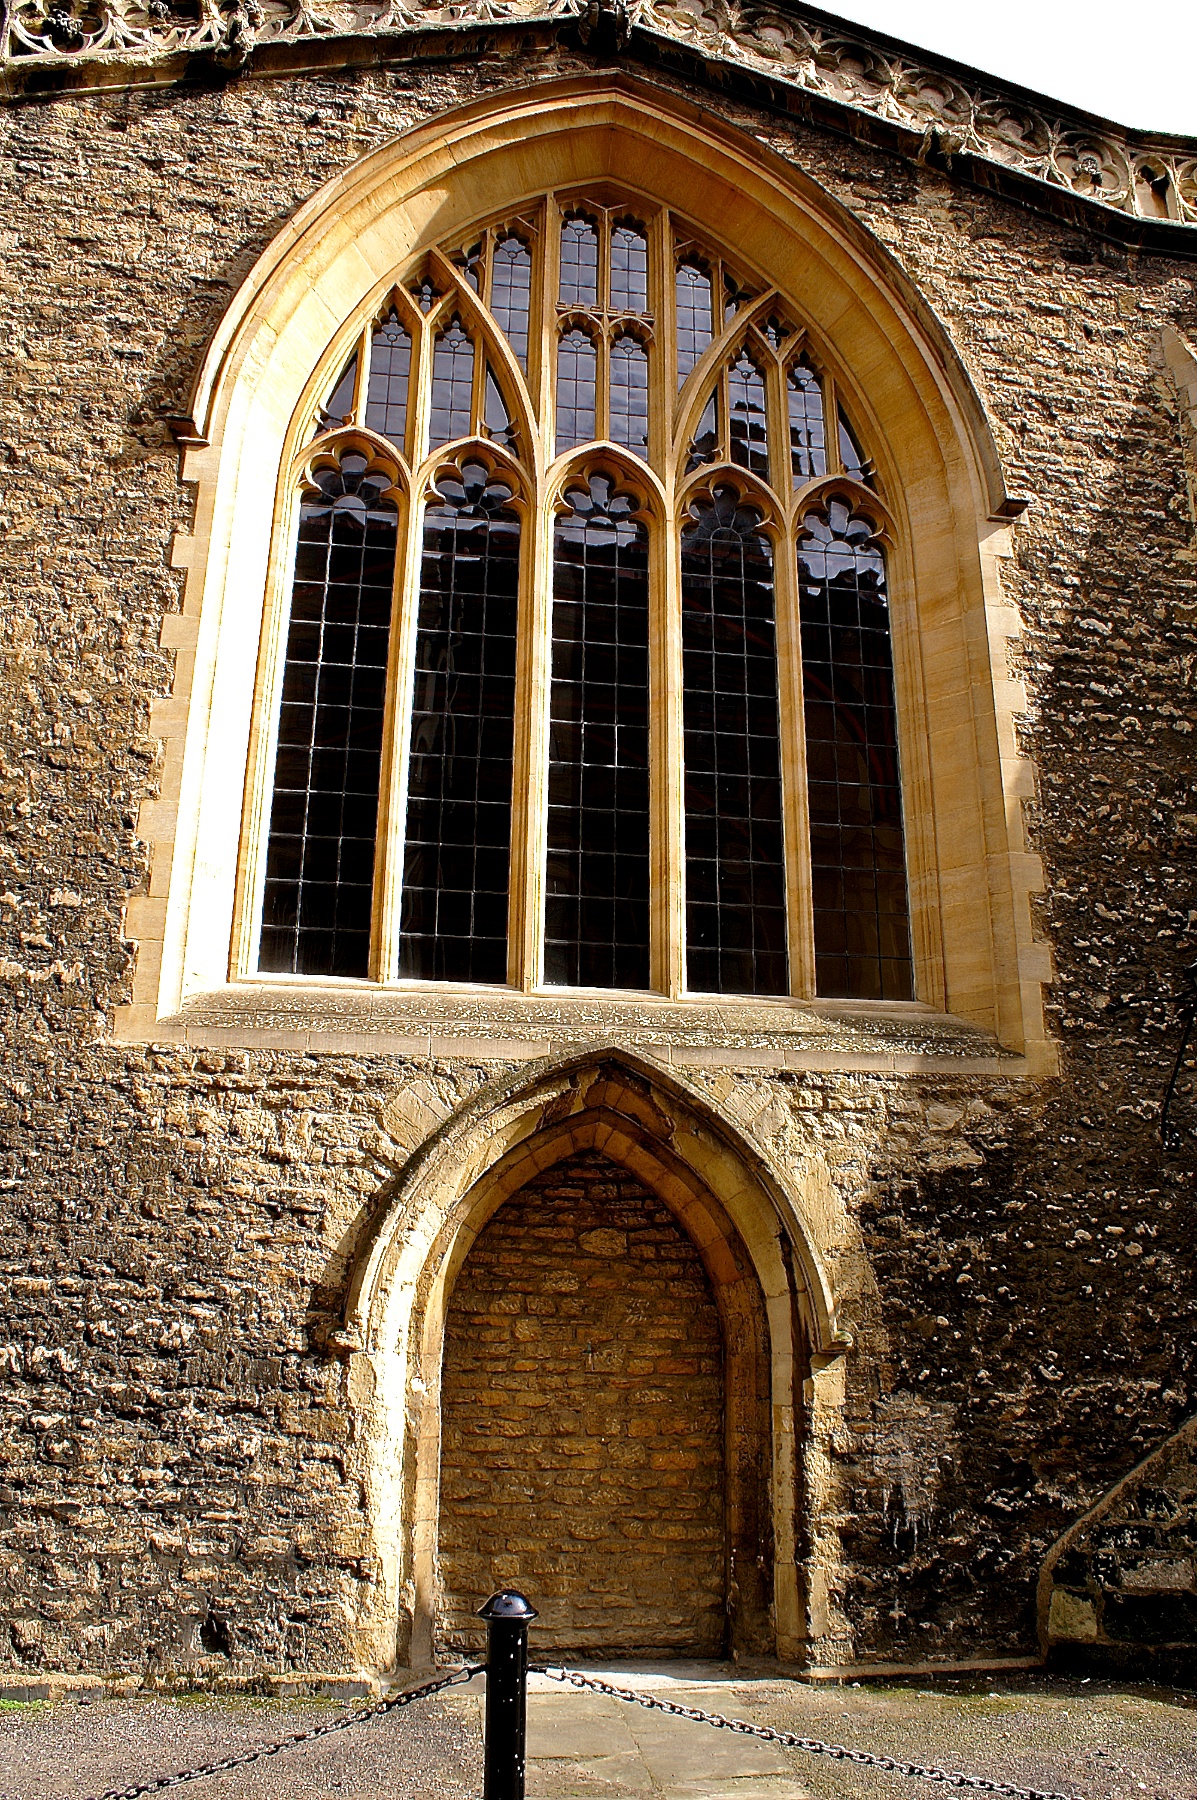 a building has an arched window in the side